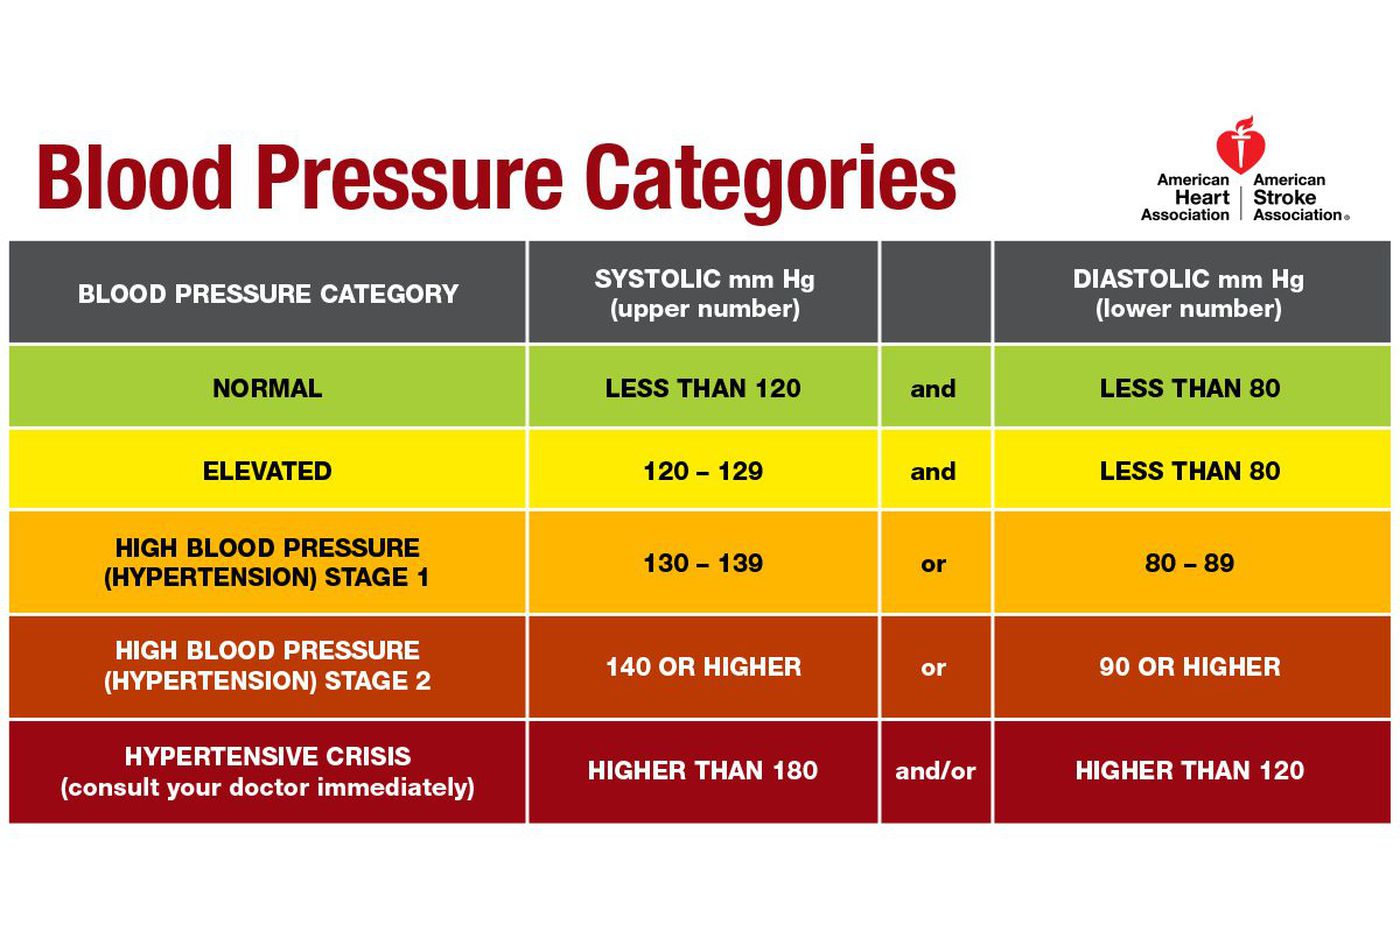 High blood pressure affects nearly half of U.S. adults ...